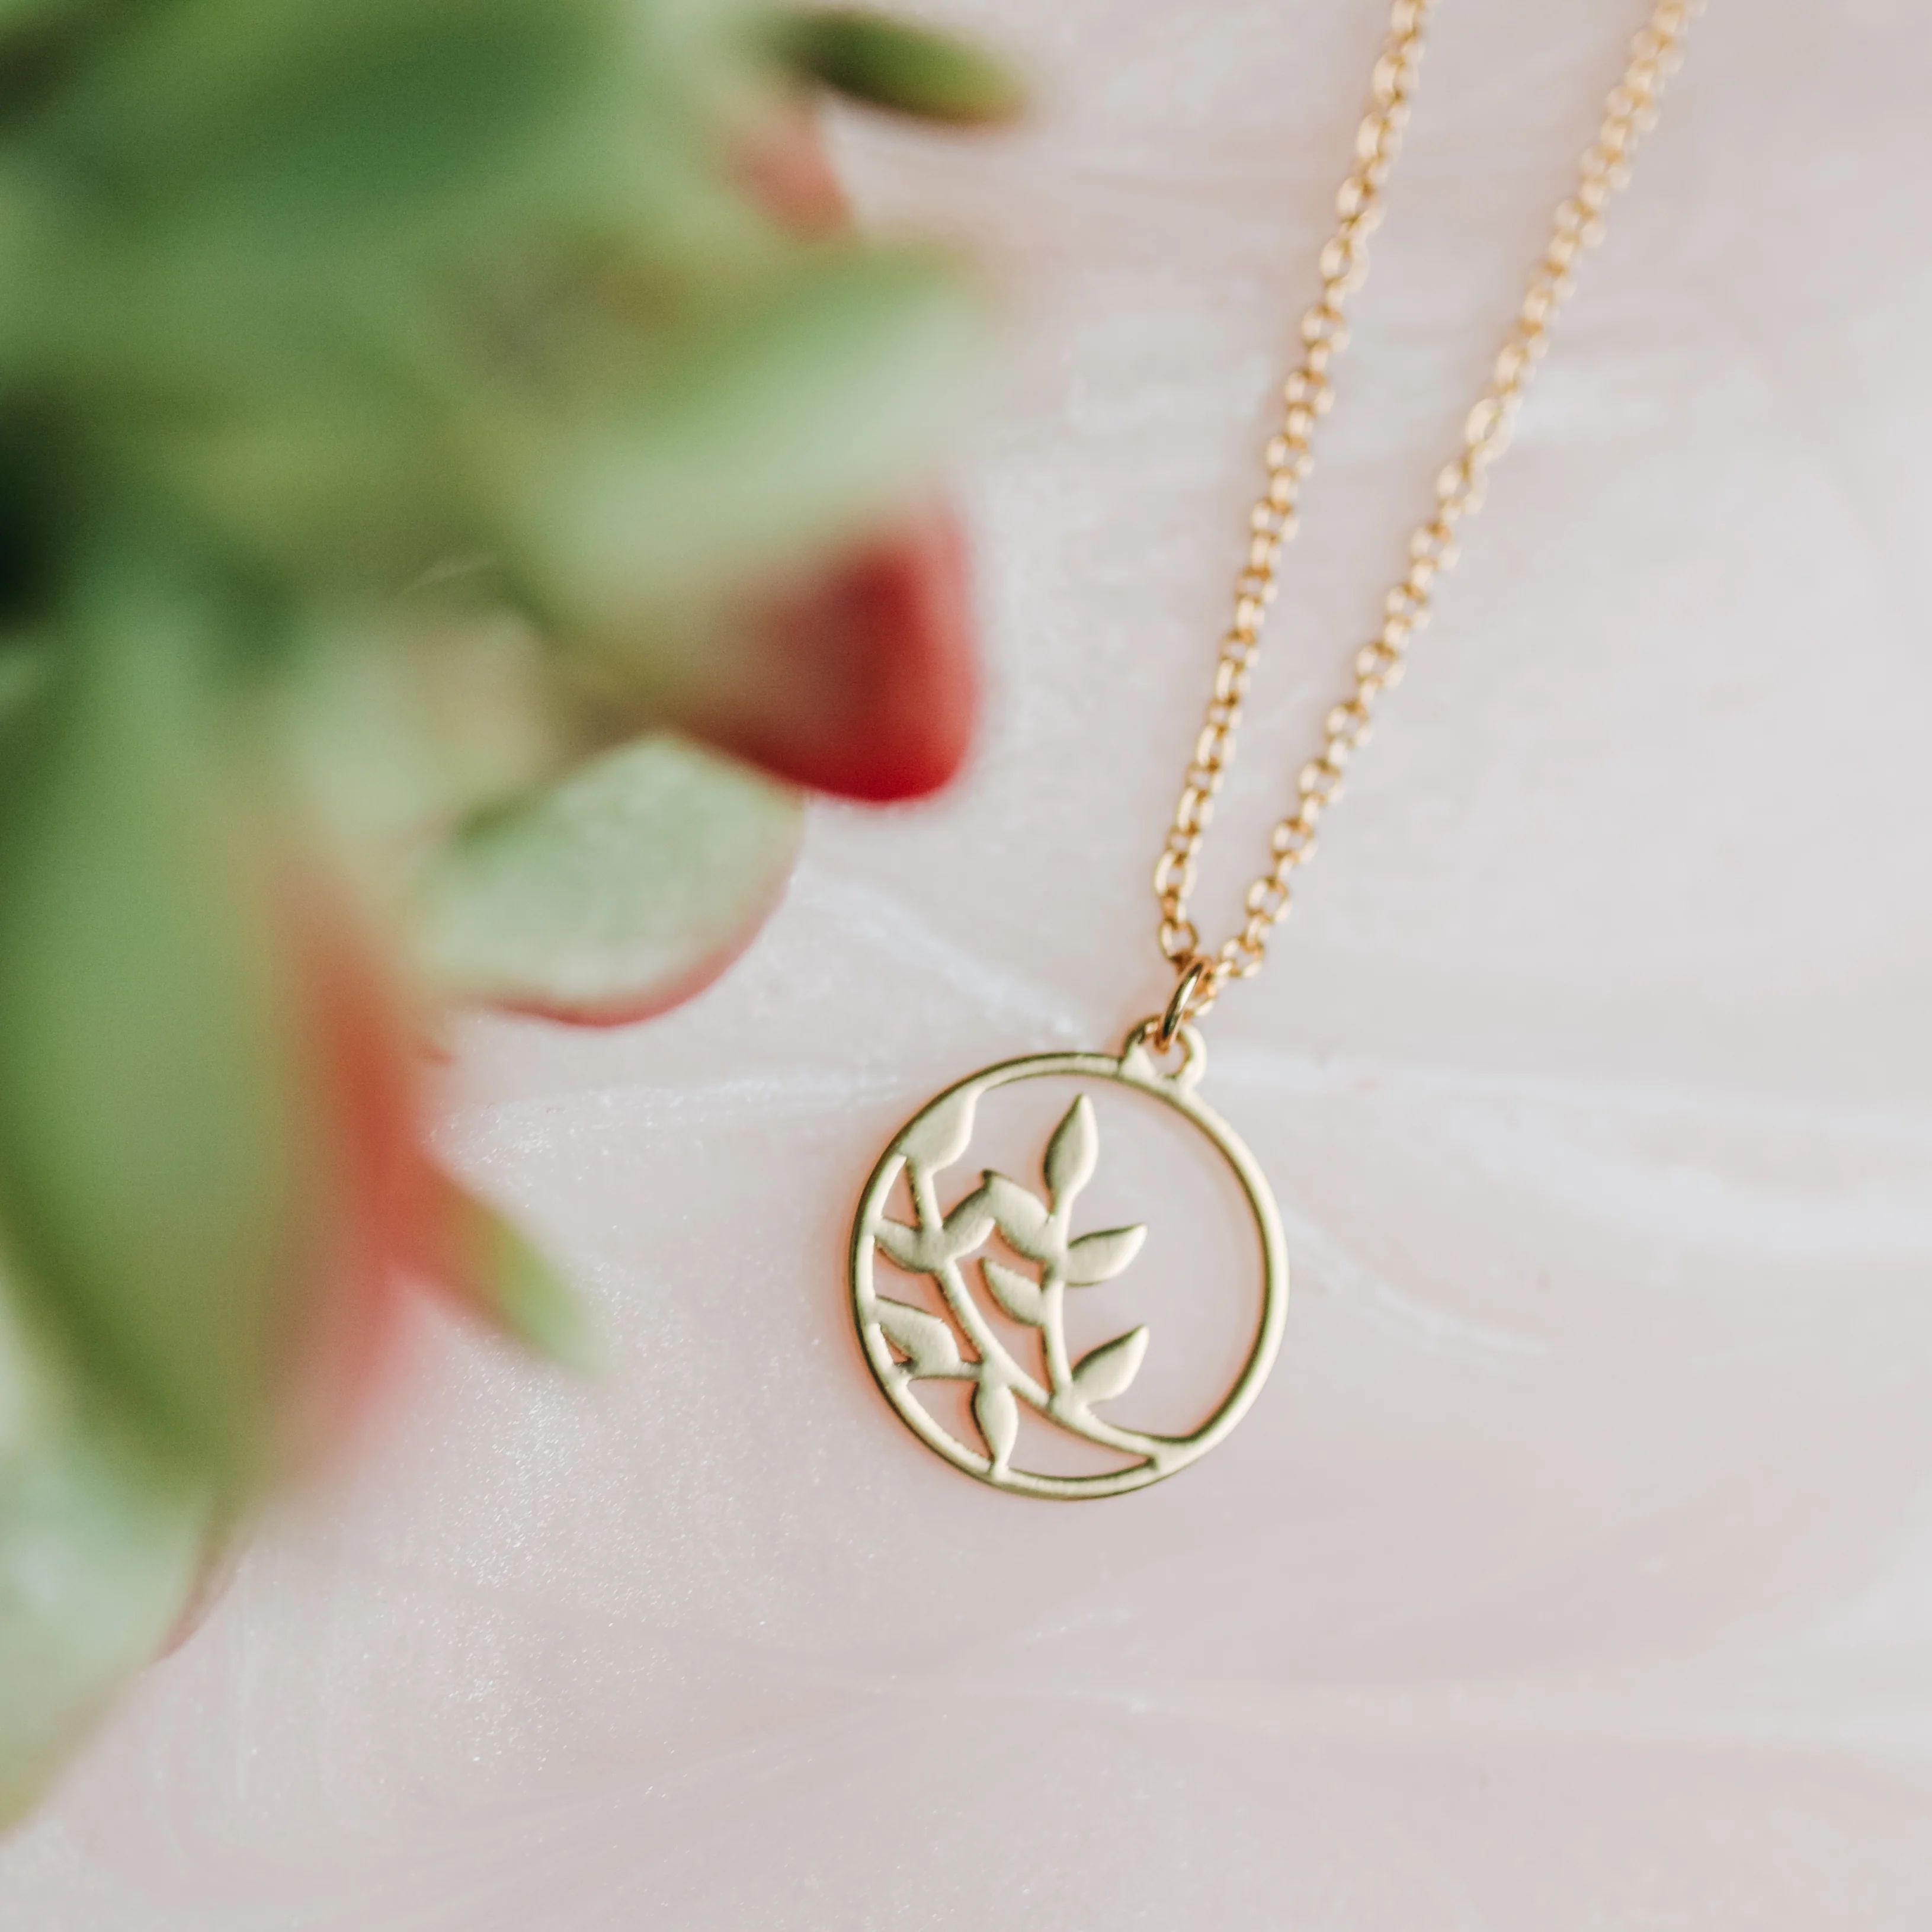 Planted Necklace | The Daily Grace Co.